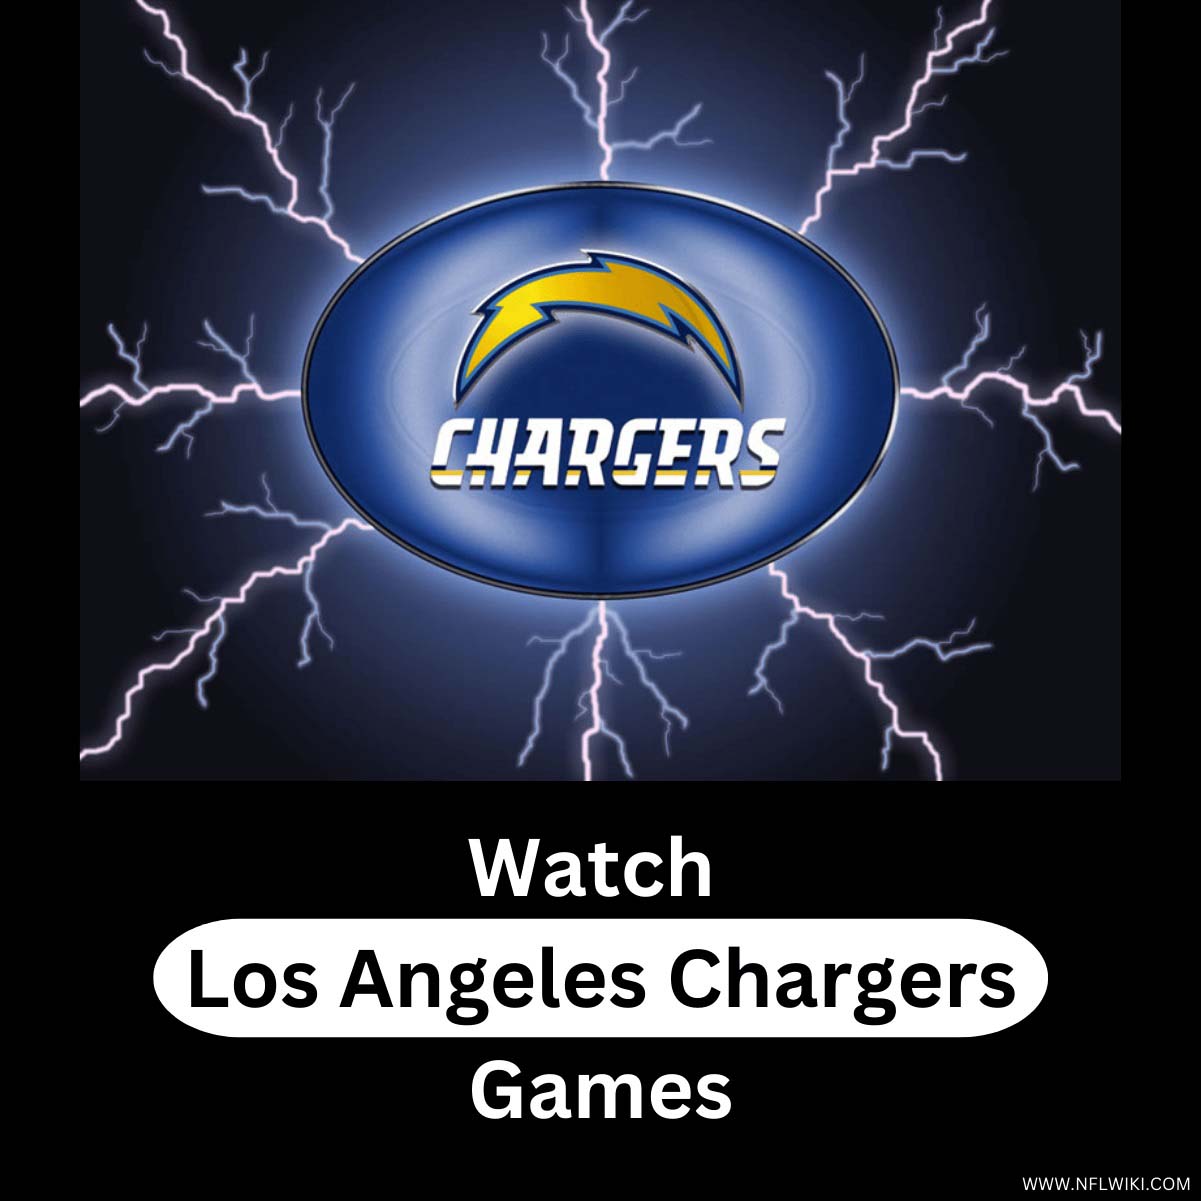 How to Watch Los Angeles Chargers Games Without Cable